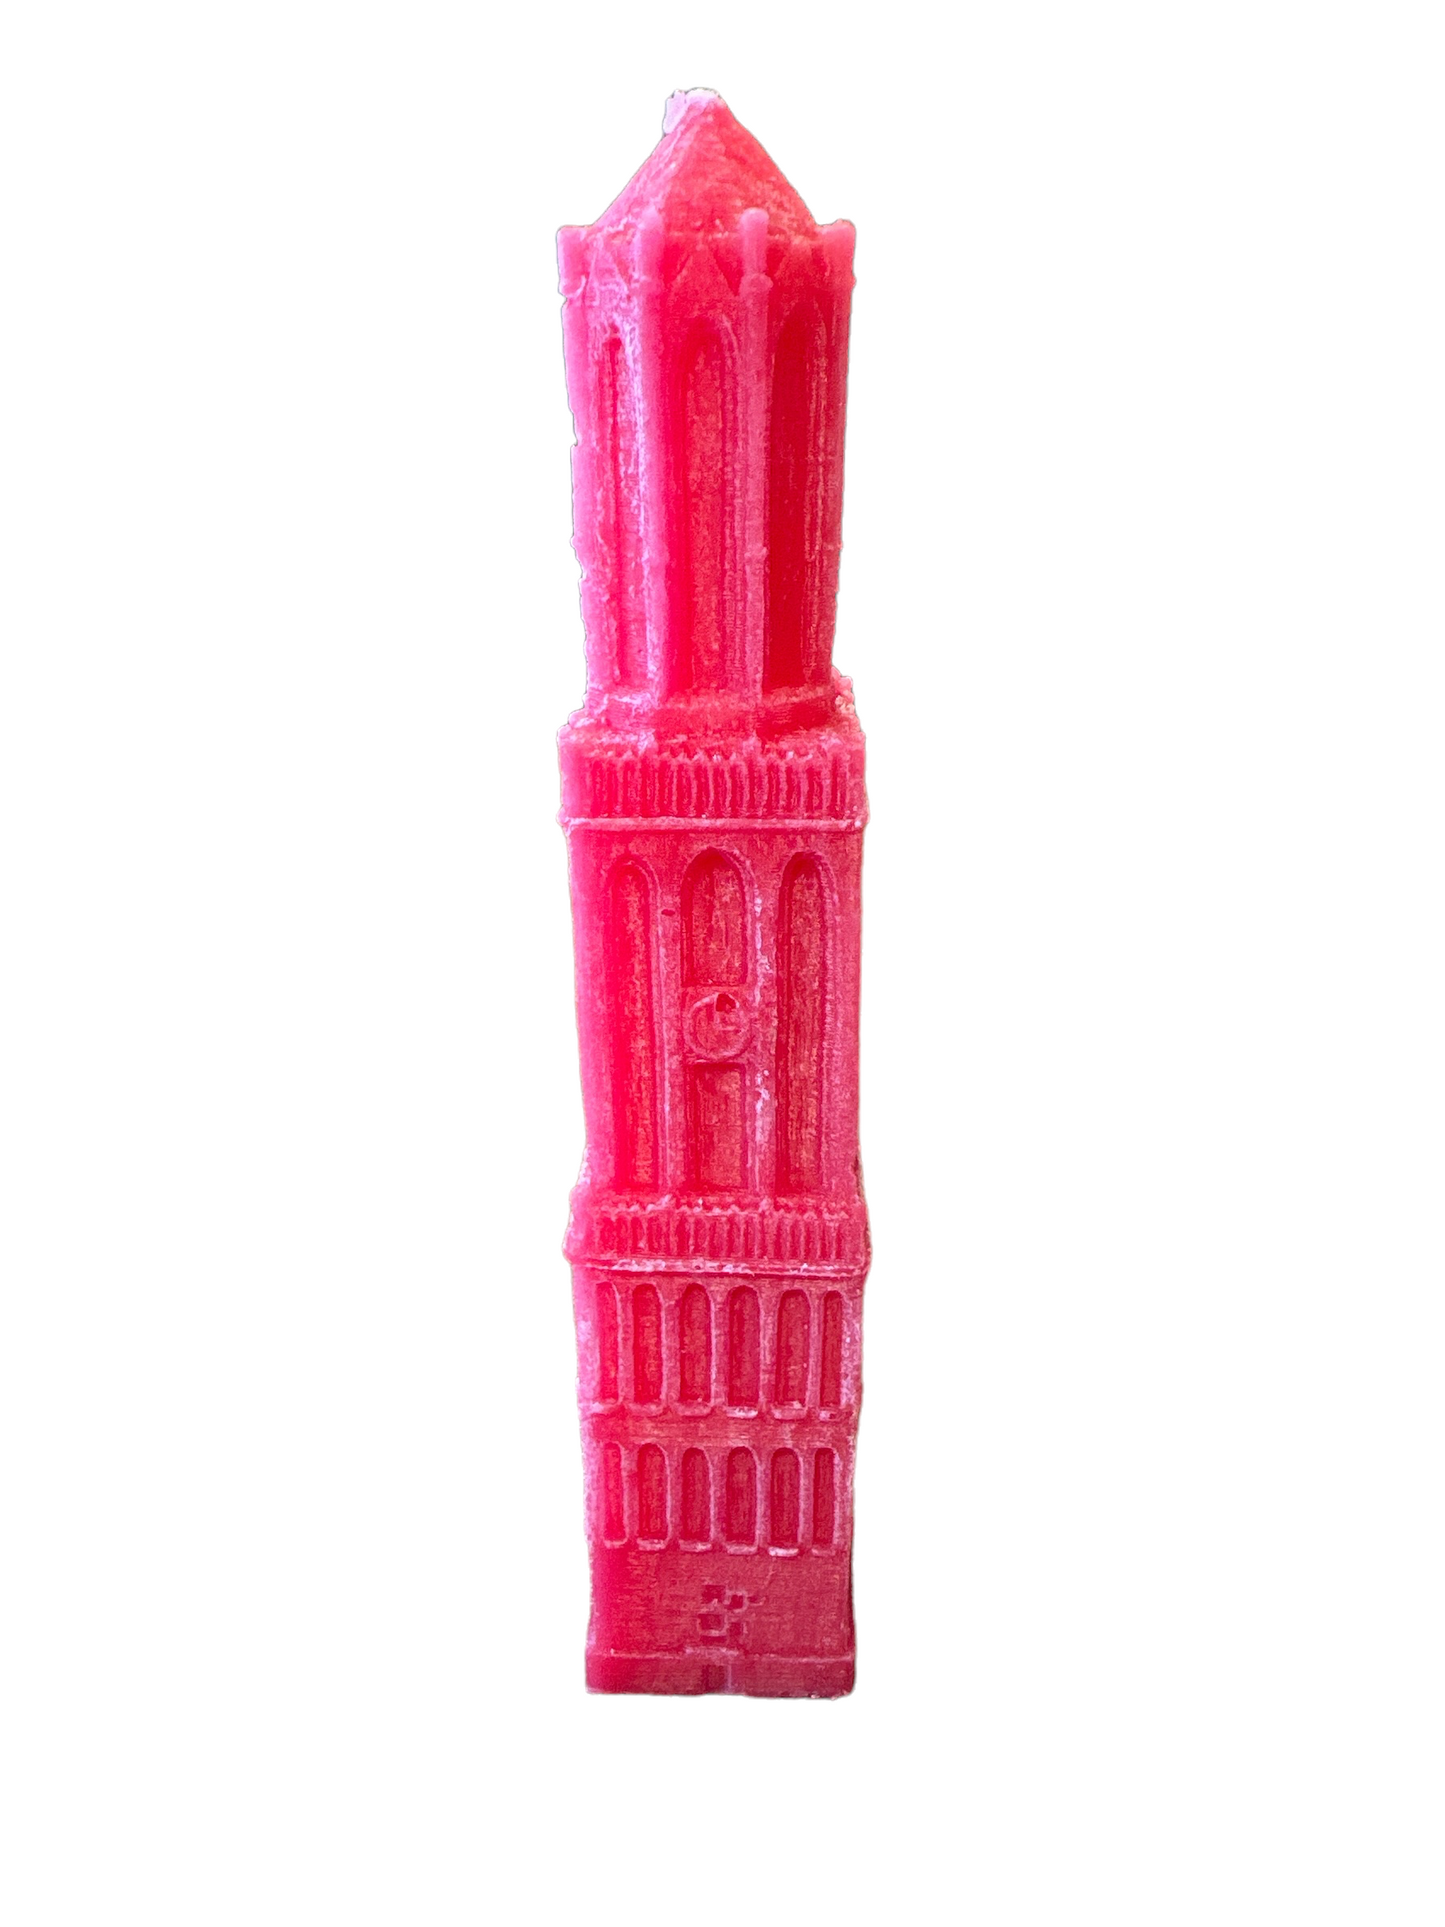 Dom Candle 22 cm